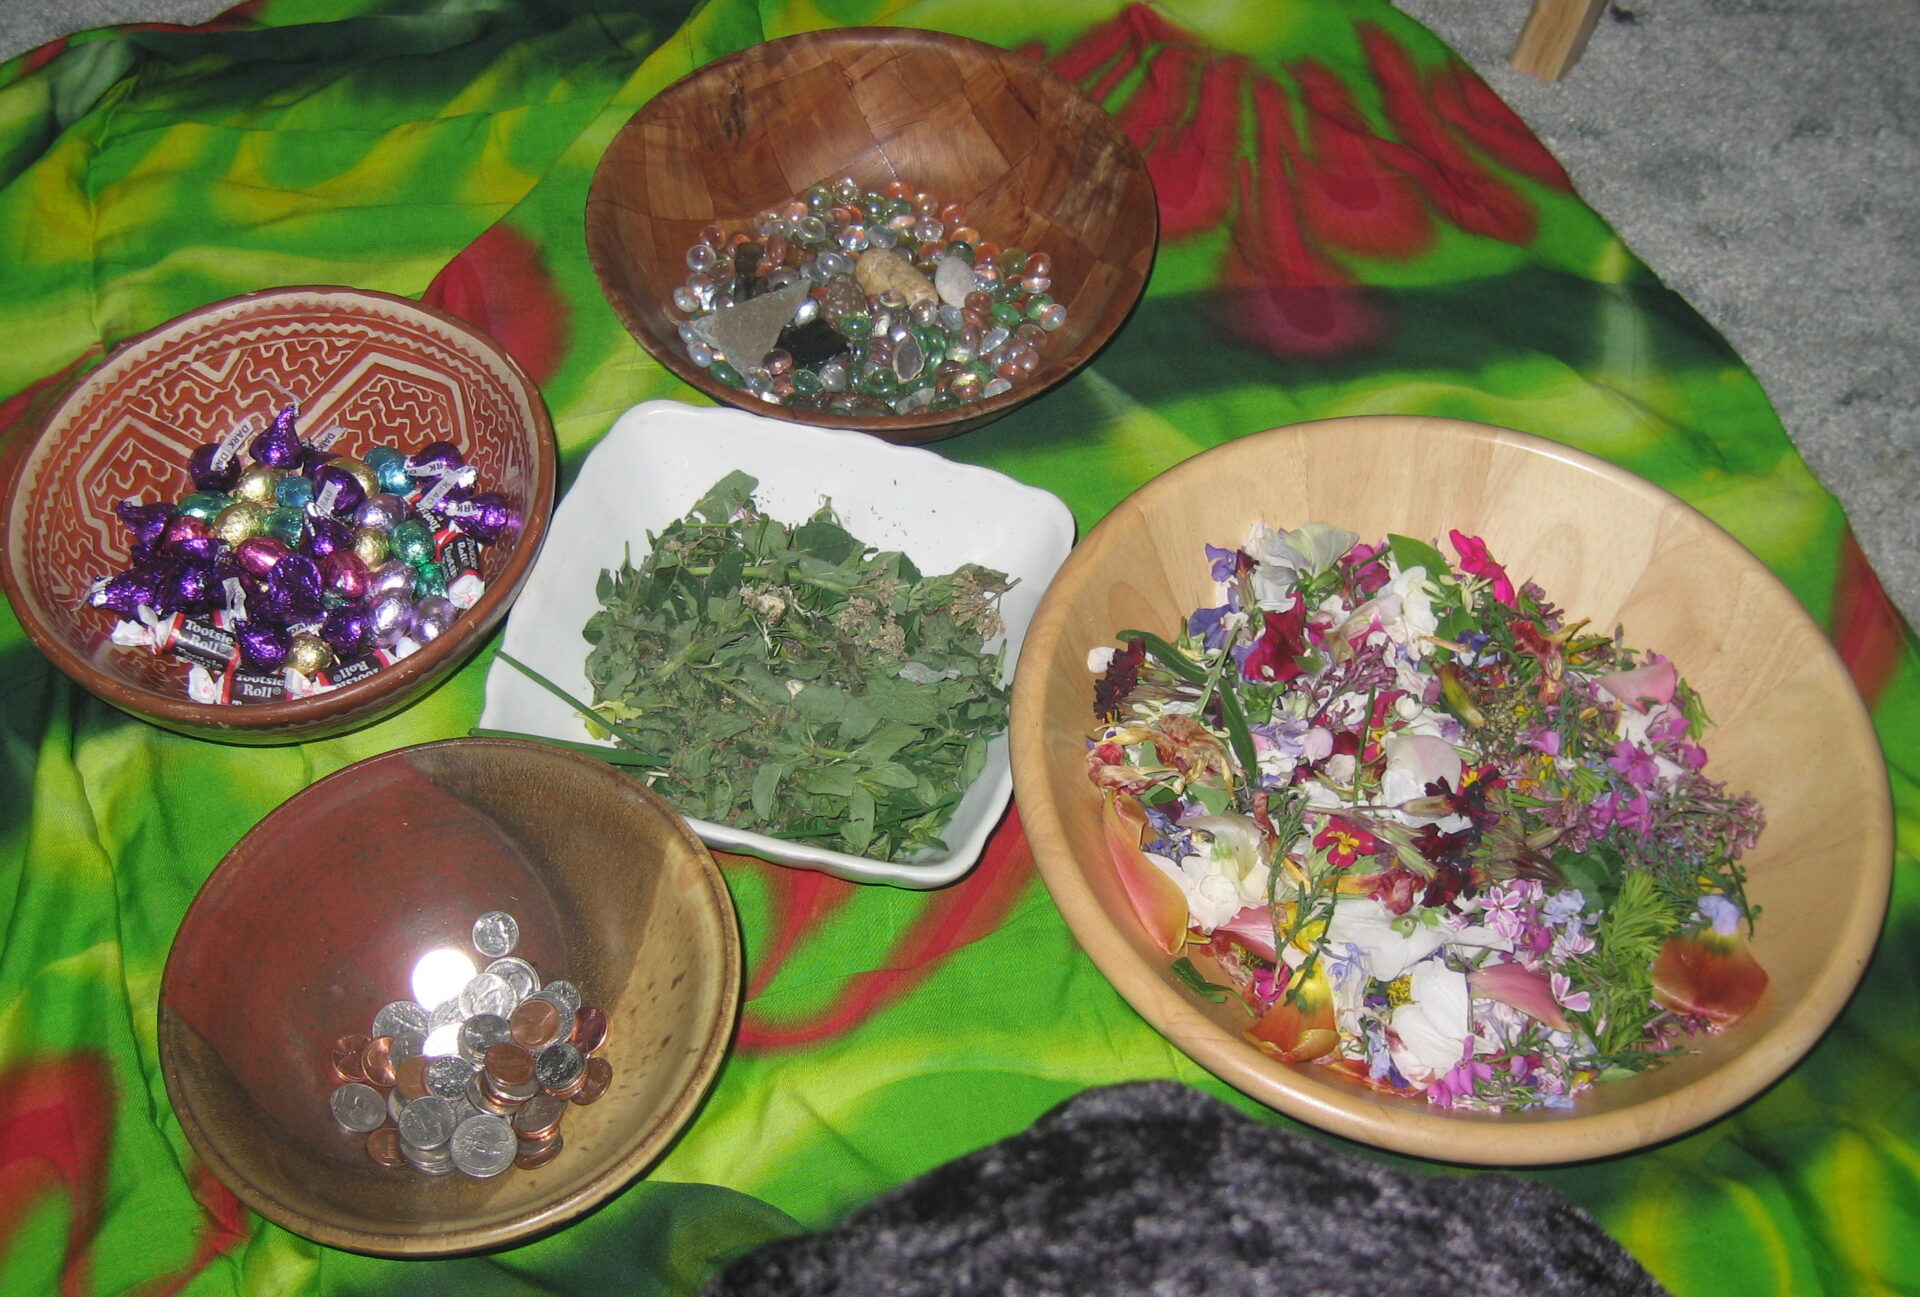 Five assorted bowls, each containing a symbol of abundance: chocolate for love, herbs for health, coins for prosperity, flowers for beauty, stones for stability